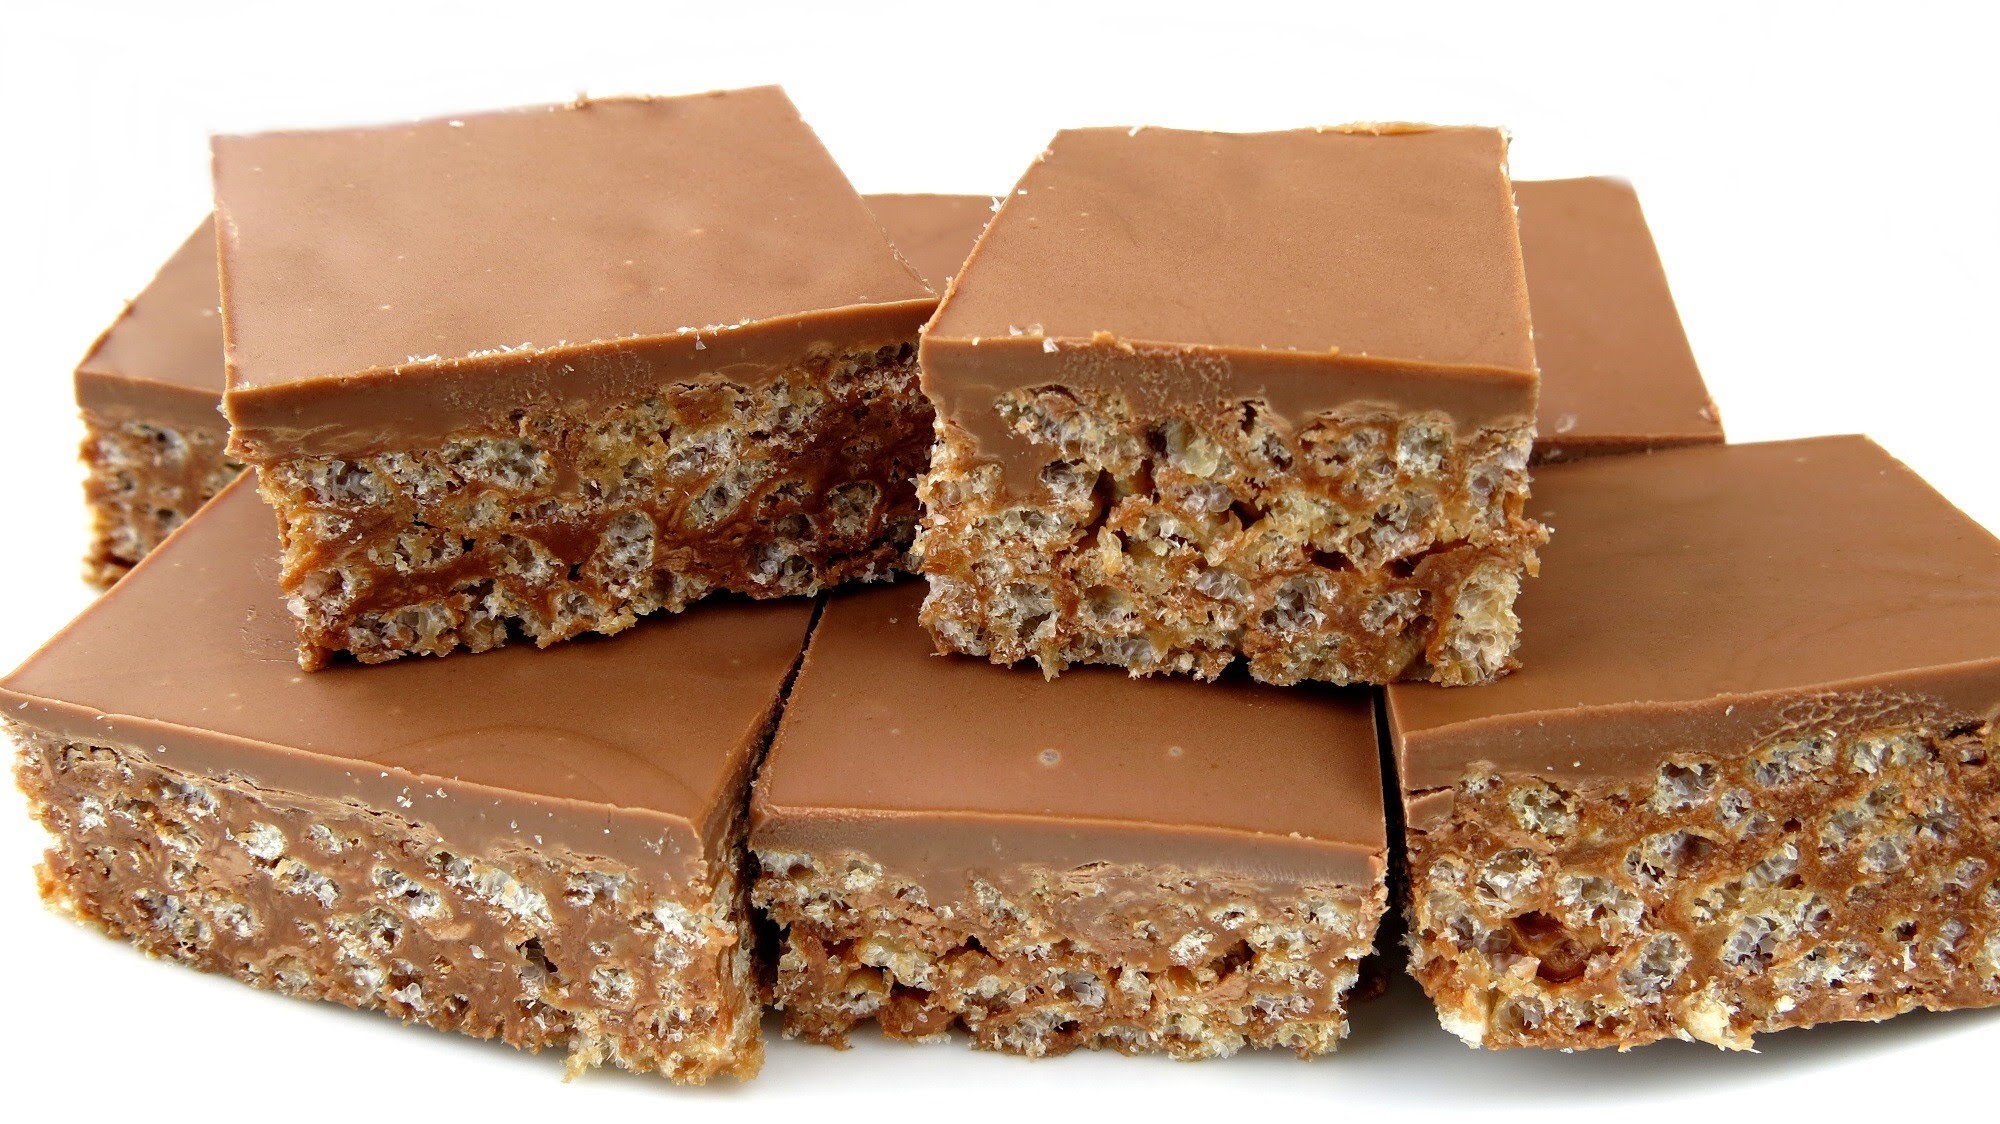 Mars slice bar easy slices recipes bars bake recipe thermomix perfect chocolate thermobliss traditional make ever popular most homemade classic